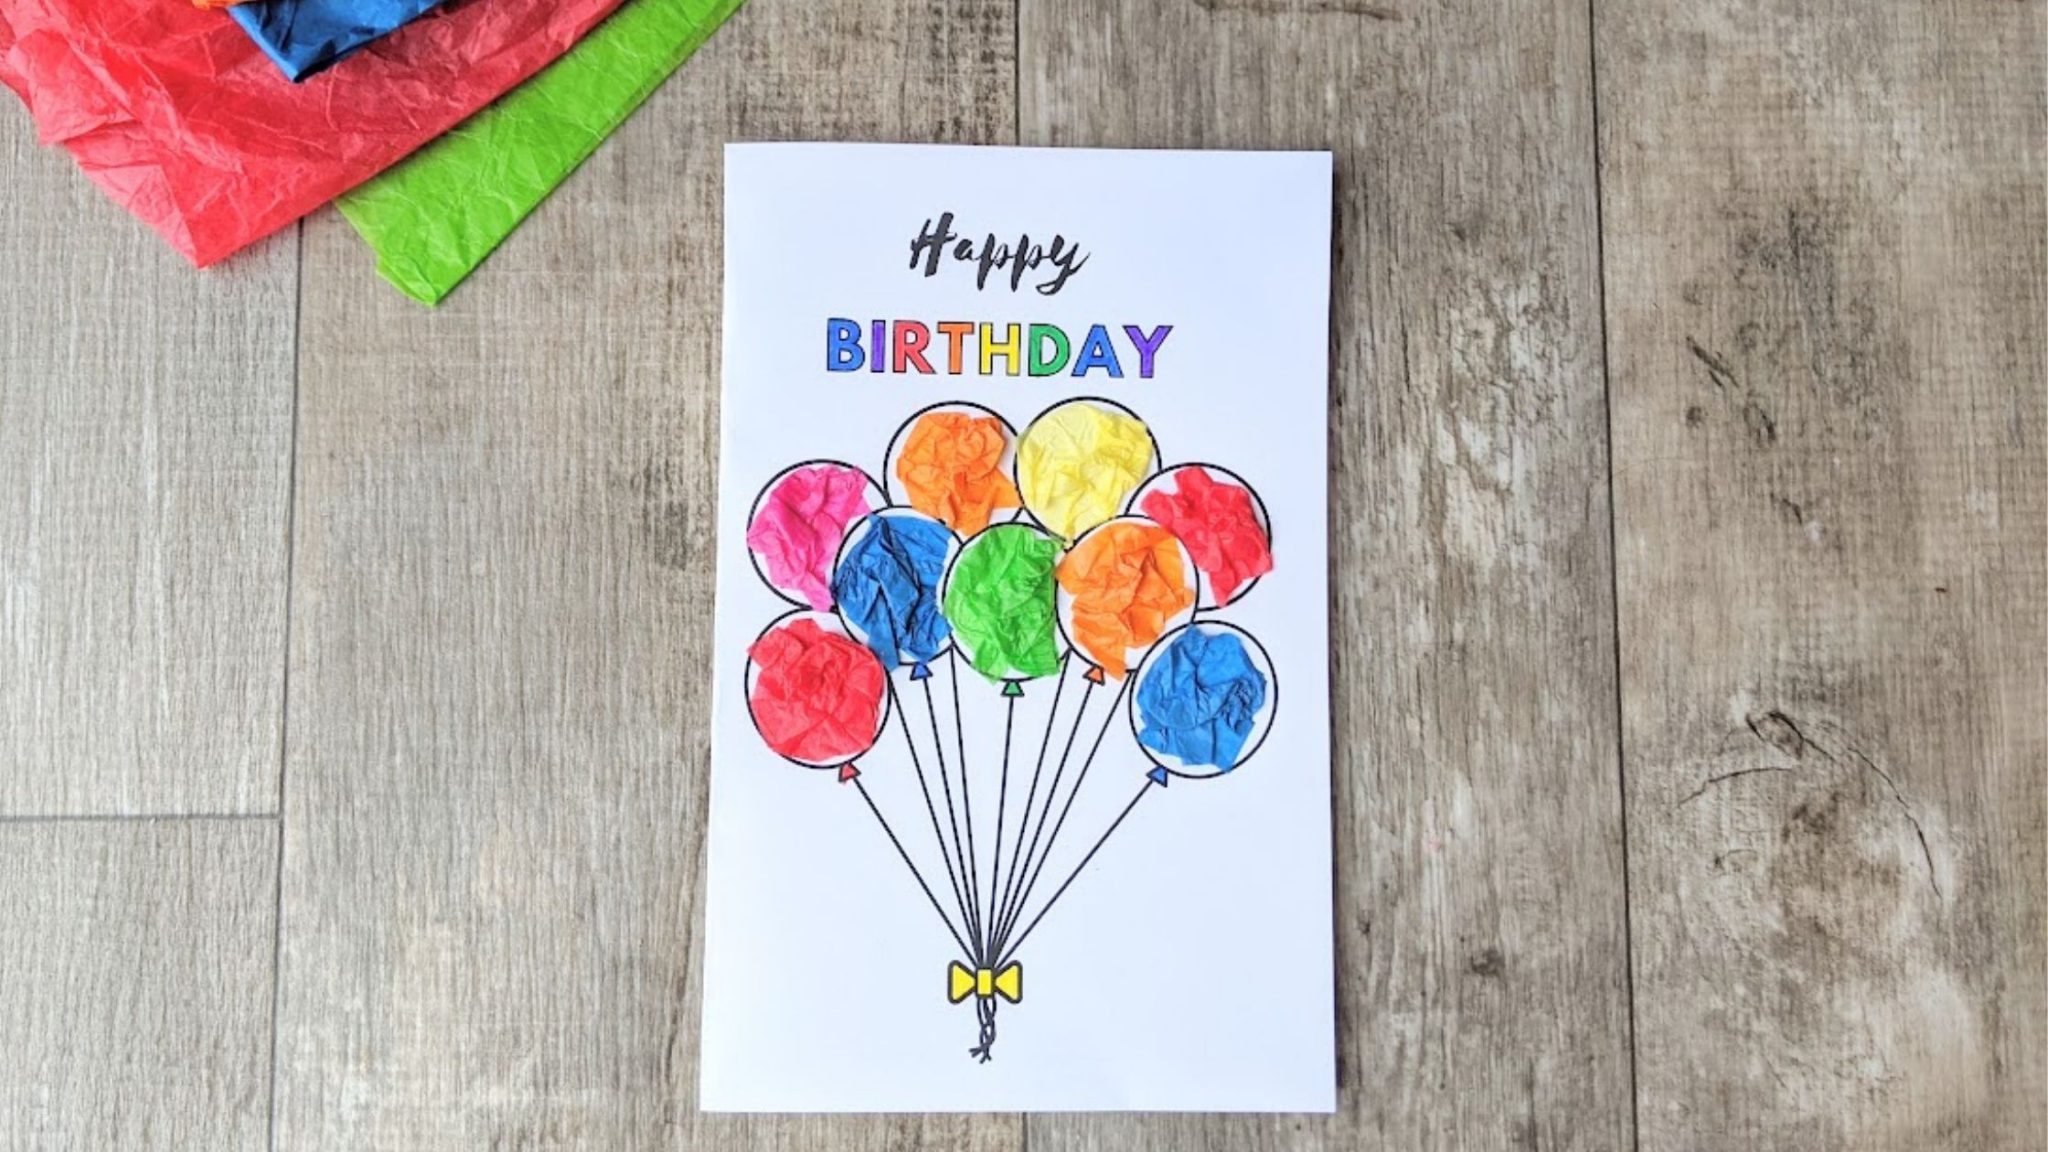 create-your-own-printable-birthday-card-online-free-printable-templates